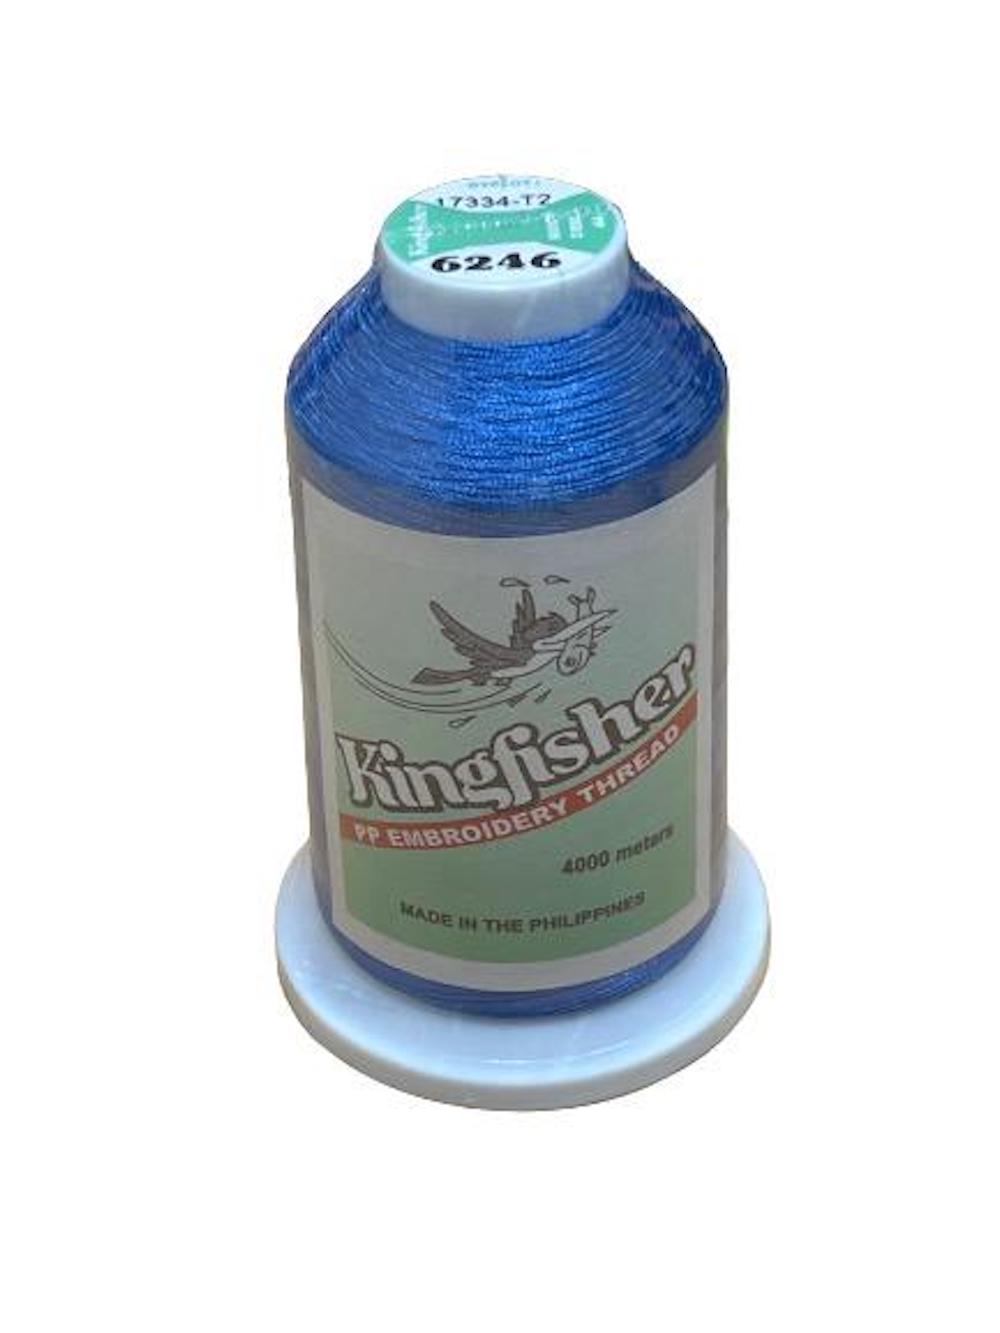 King Fisher Embroidery Thread 4000m 6246 - MY SEWING MALL